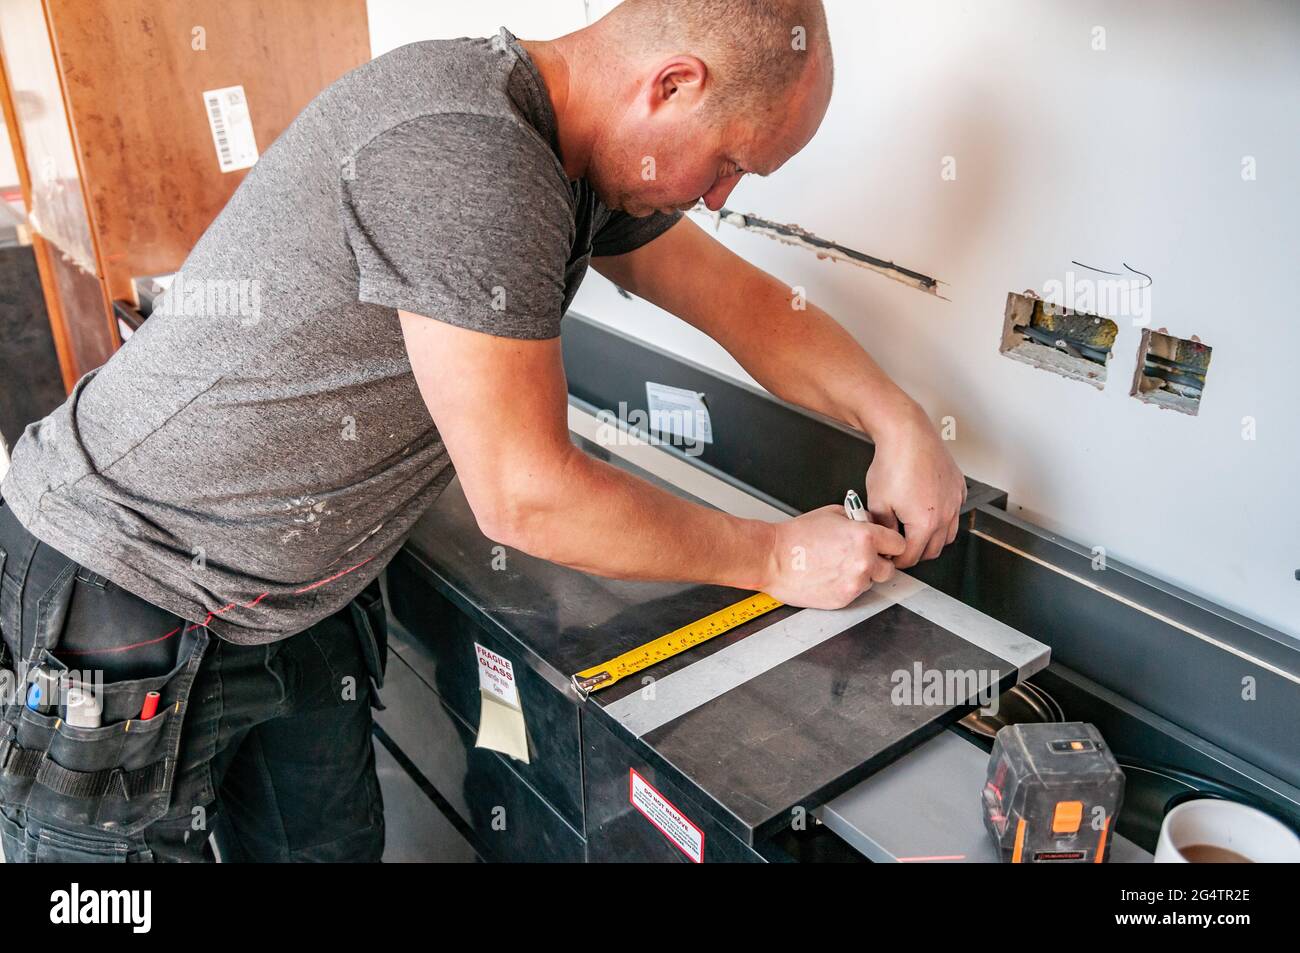 Kitchen fitter at work Stock Photo